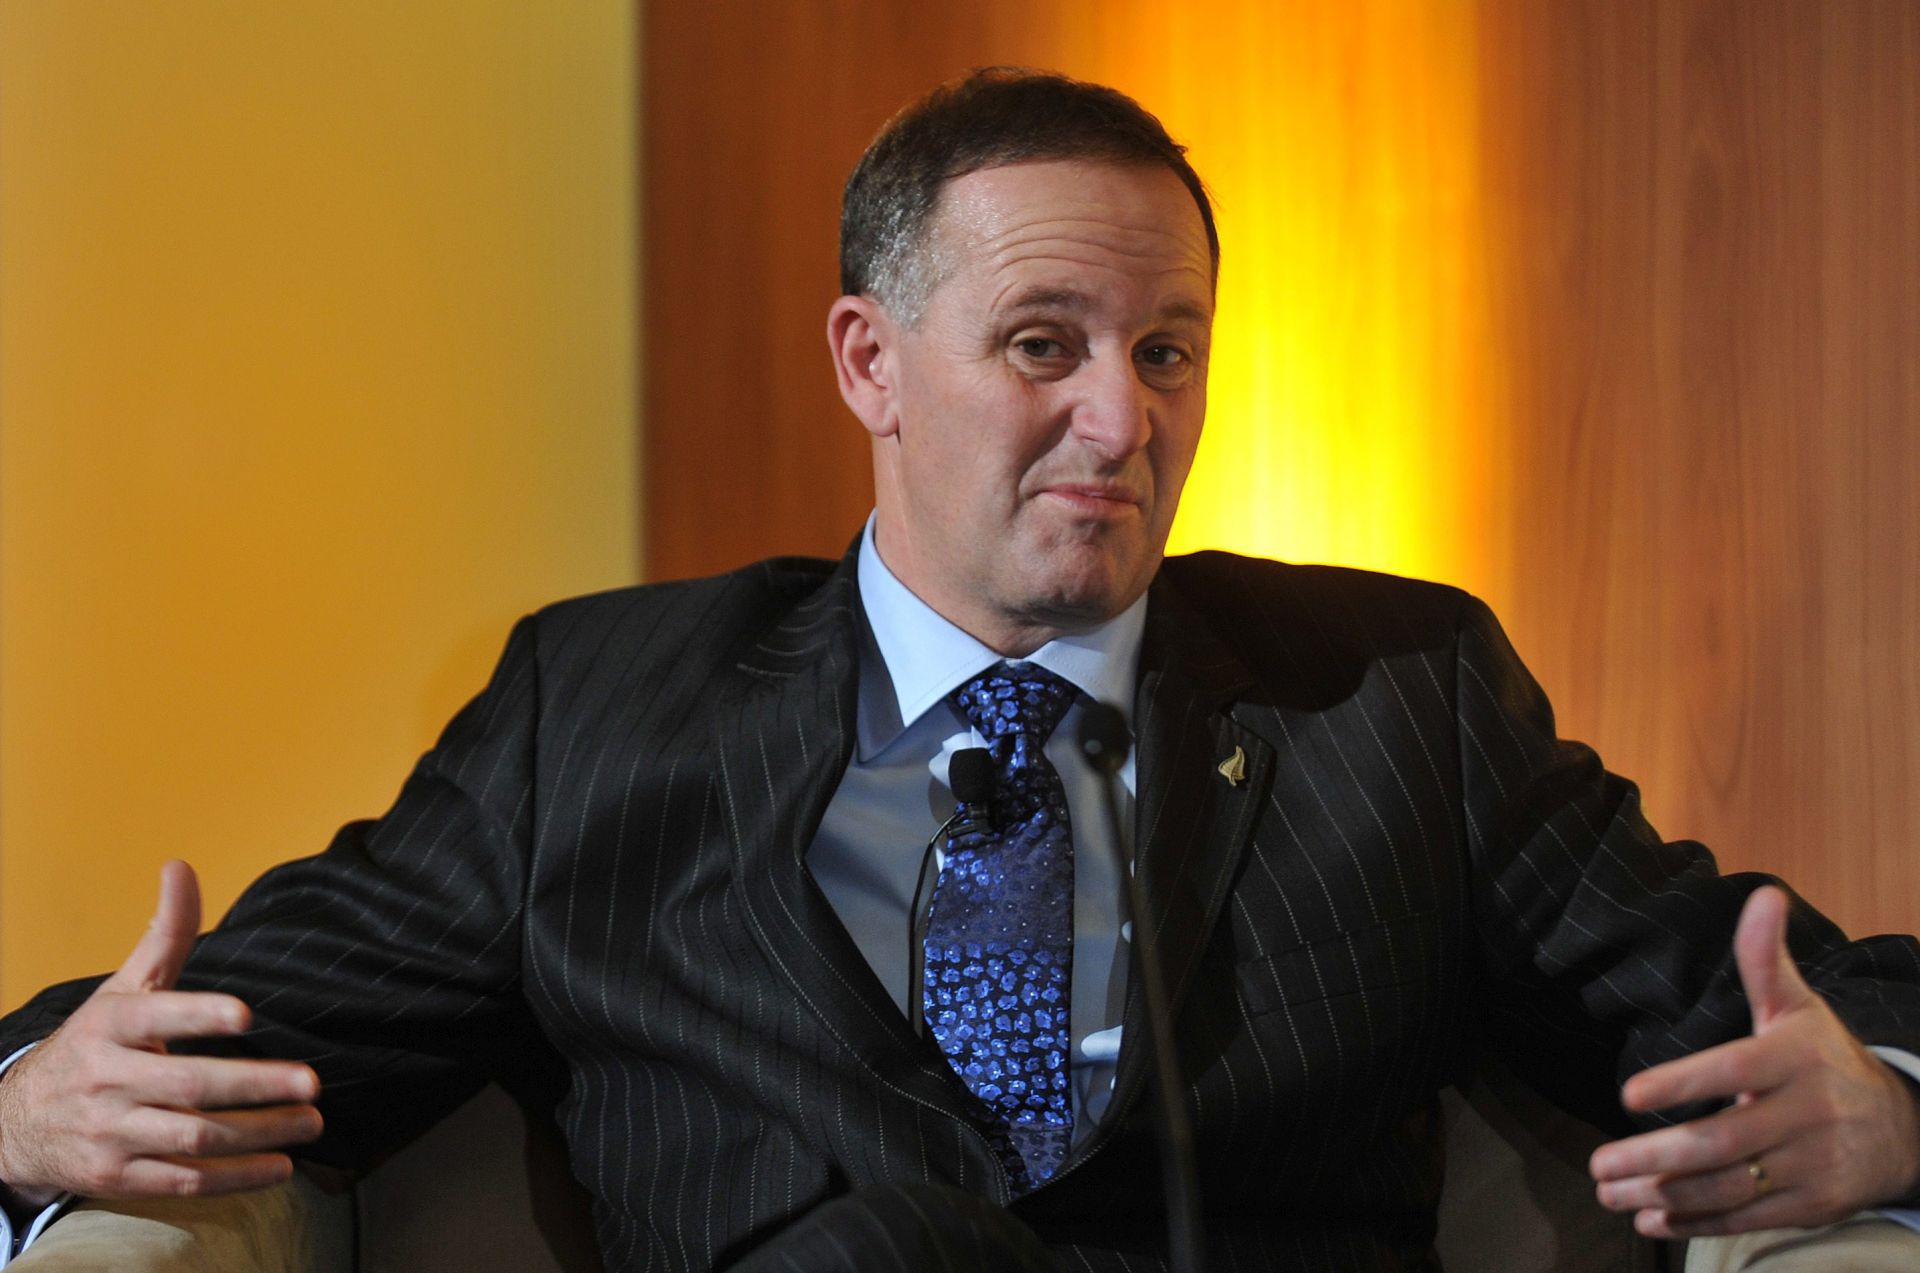 epa05660312 (FILE) A file picture dated 20 June 2011 shows New Zealand Prime Minister John Key talking to Commonwealth Bank CEO Ralph Norris (unseen) in Sydney, Australia. According to media reports on 05 December 2016, John Key announced that he is resigning as Prime Minister of New Zealand at the behest of his wife, as his role as prime minister has an impact on his family life. Key has stated that his last day as prime minister will be 12 December 2016.  EPA/PAUL MILLER AUSTRALIA AND NEW ZEALAND OUT